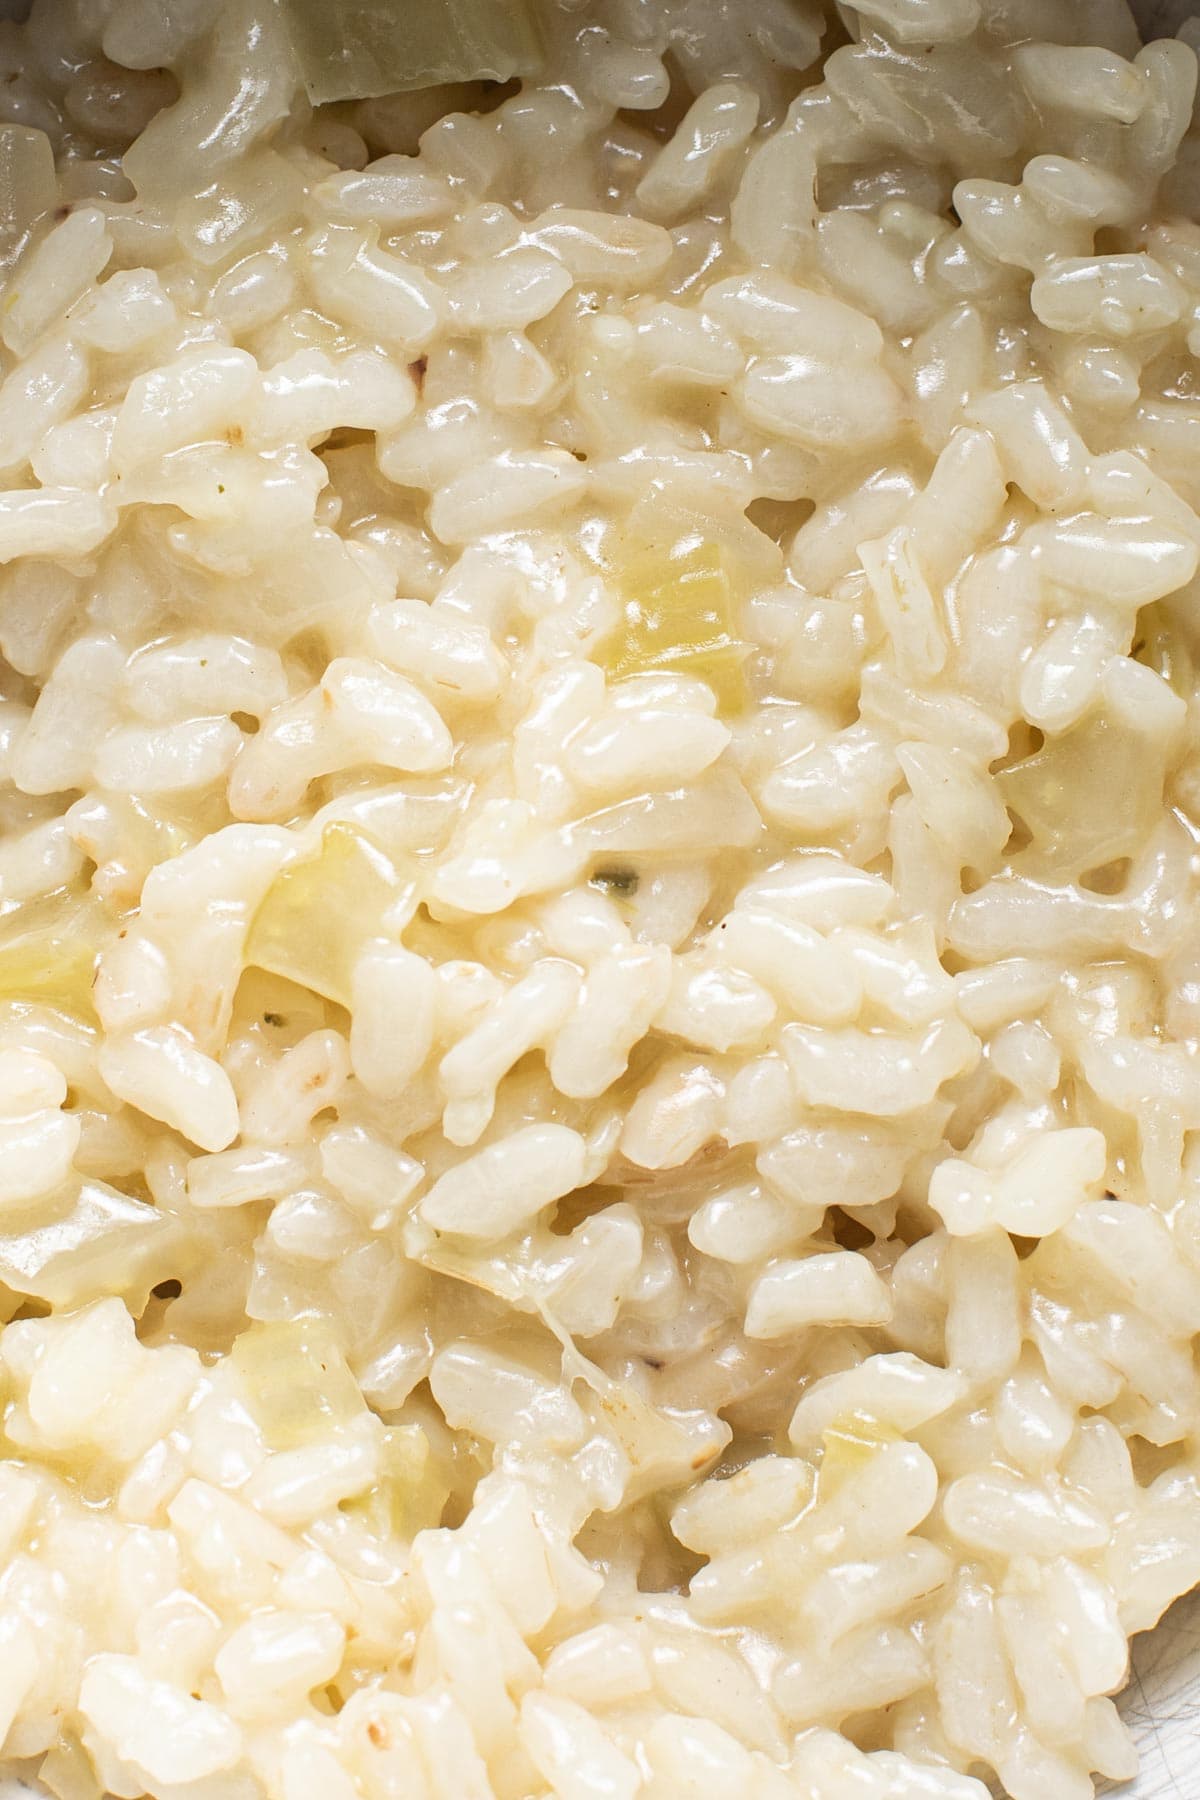 A very close-up image of cooked risotto in a bowl.